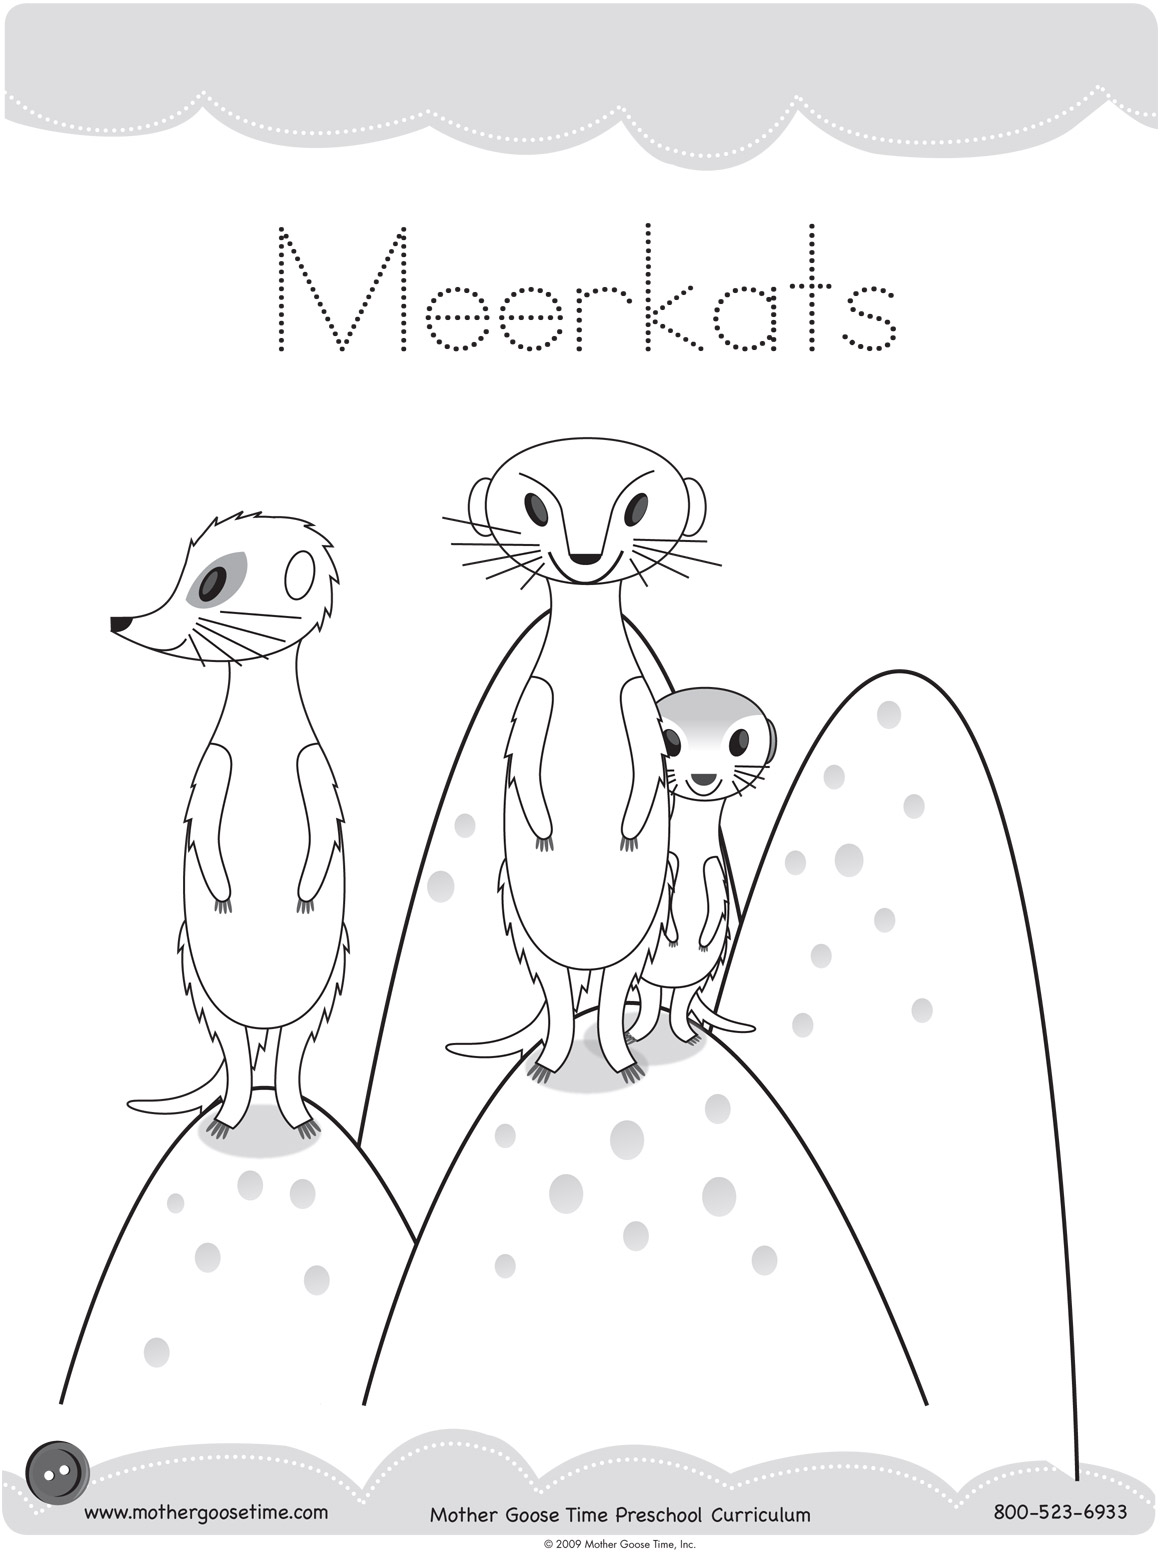 The best free Meerkat drawing images. Download from 79 free drawings of